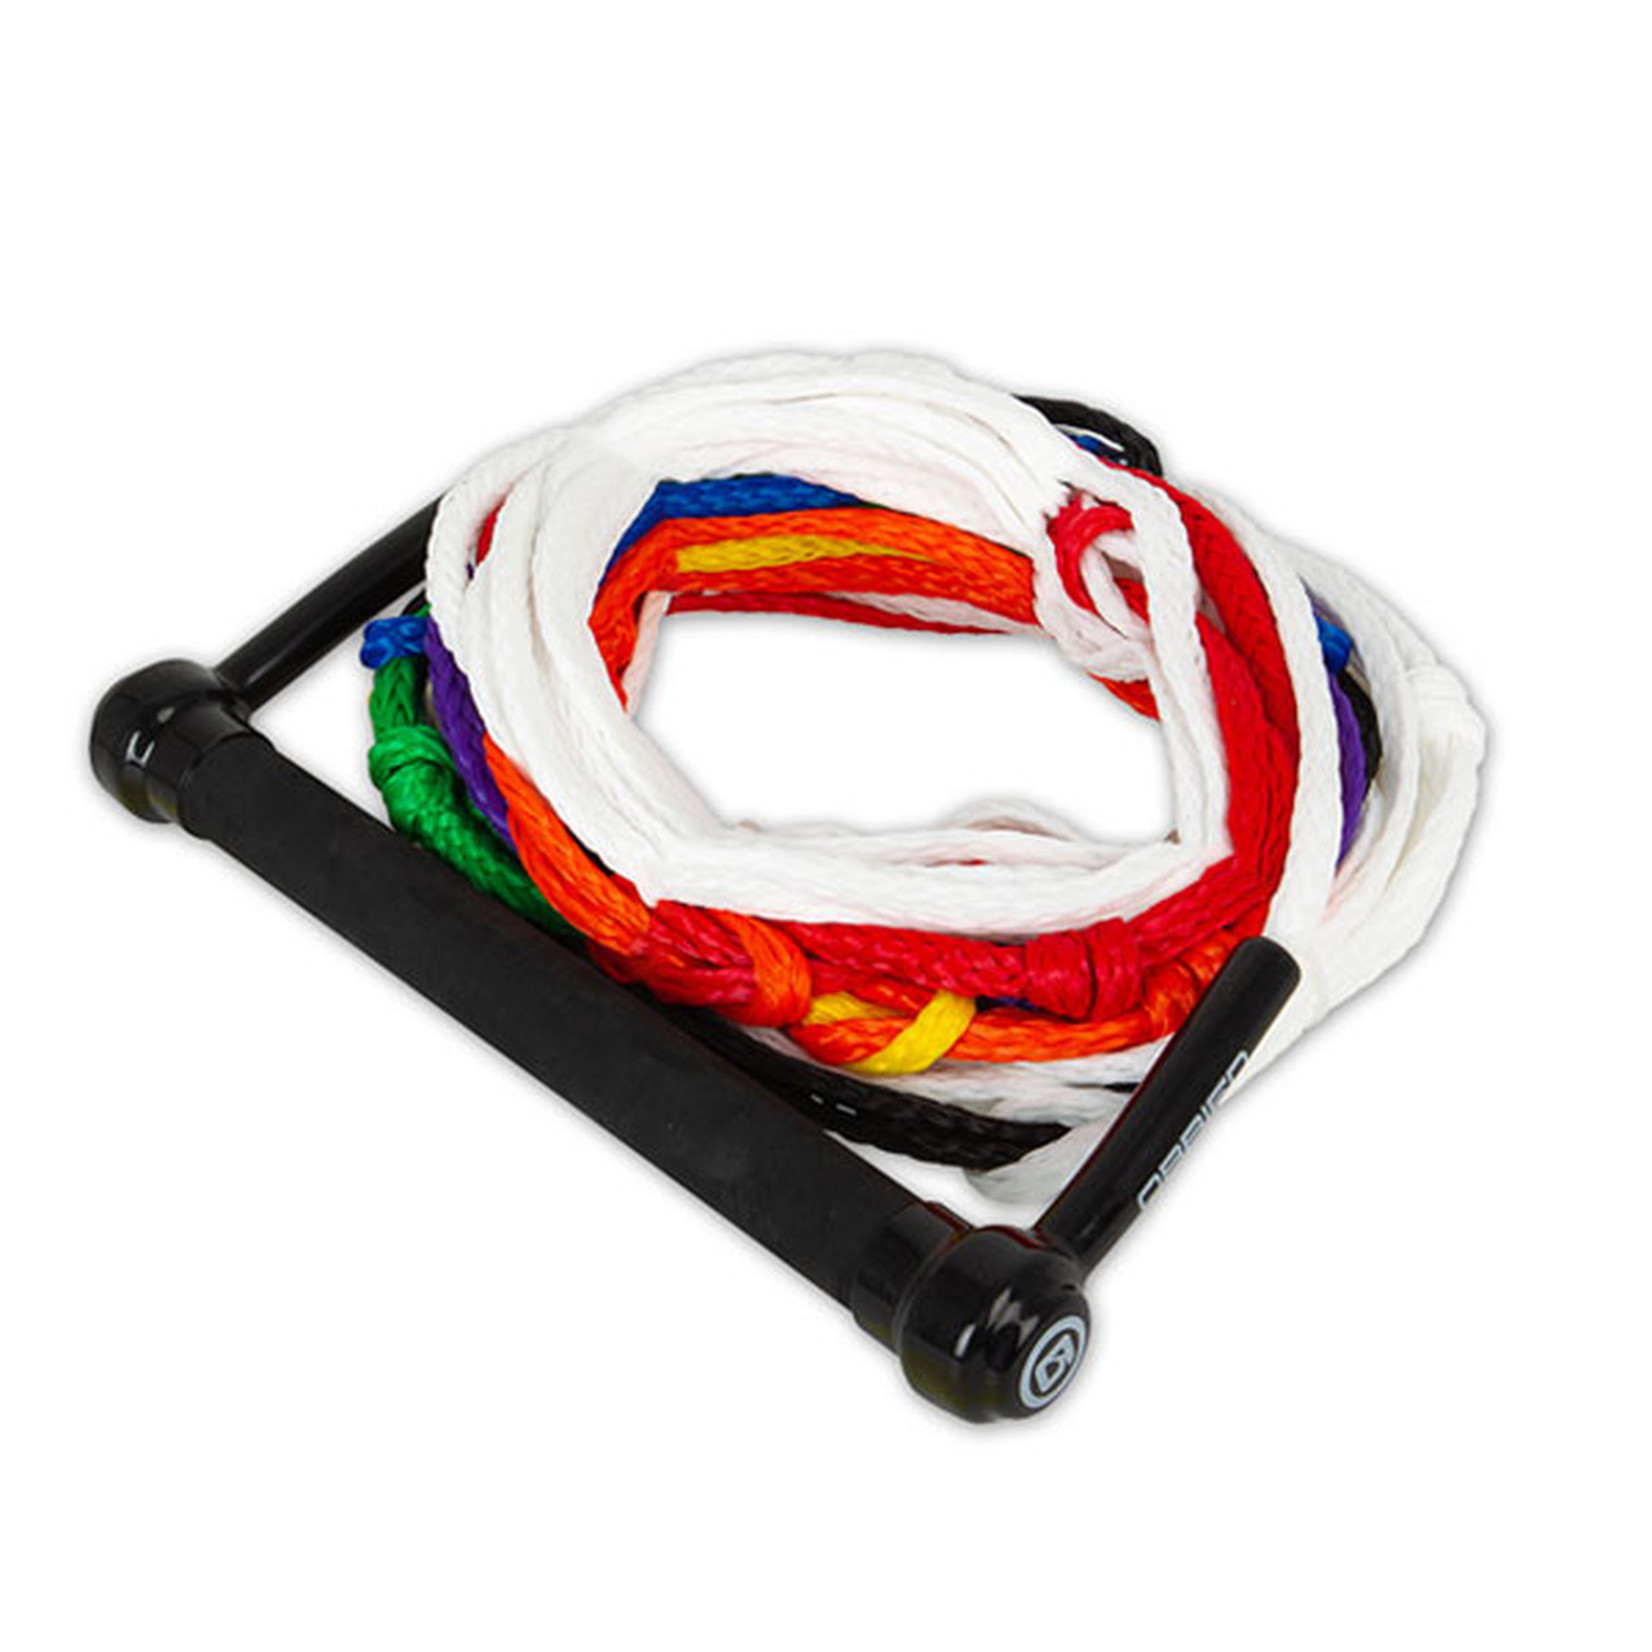 O'Brien 8-Section Ski Combo Rope and Handle